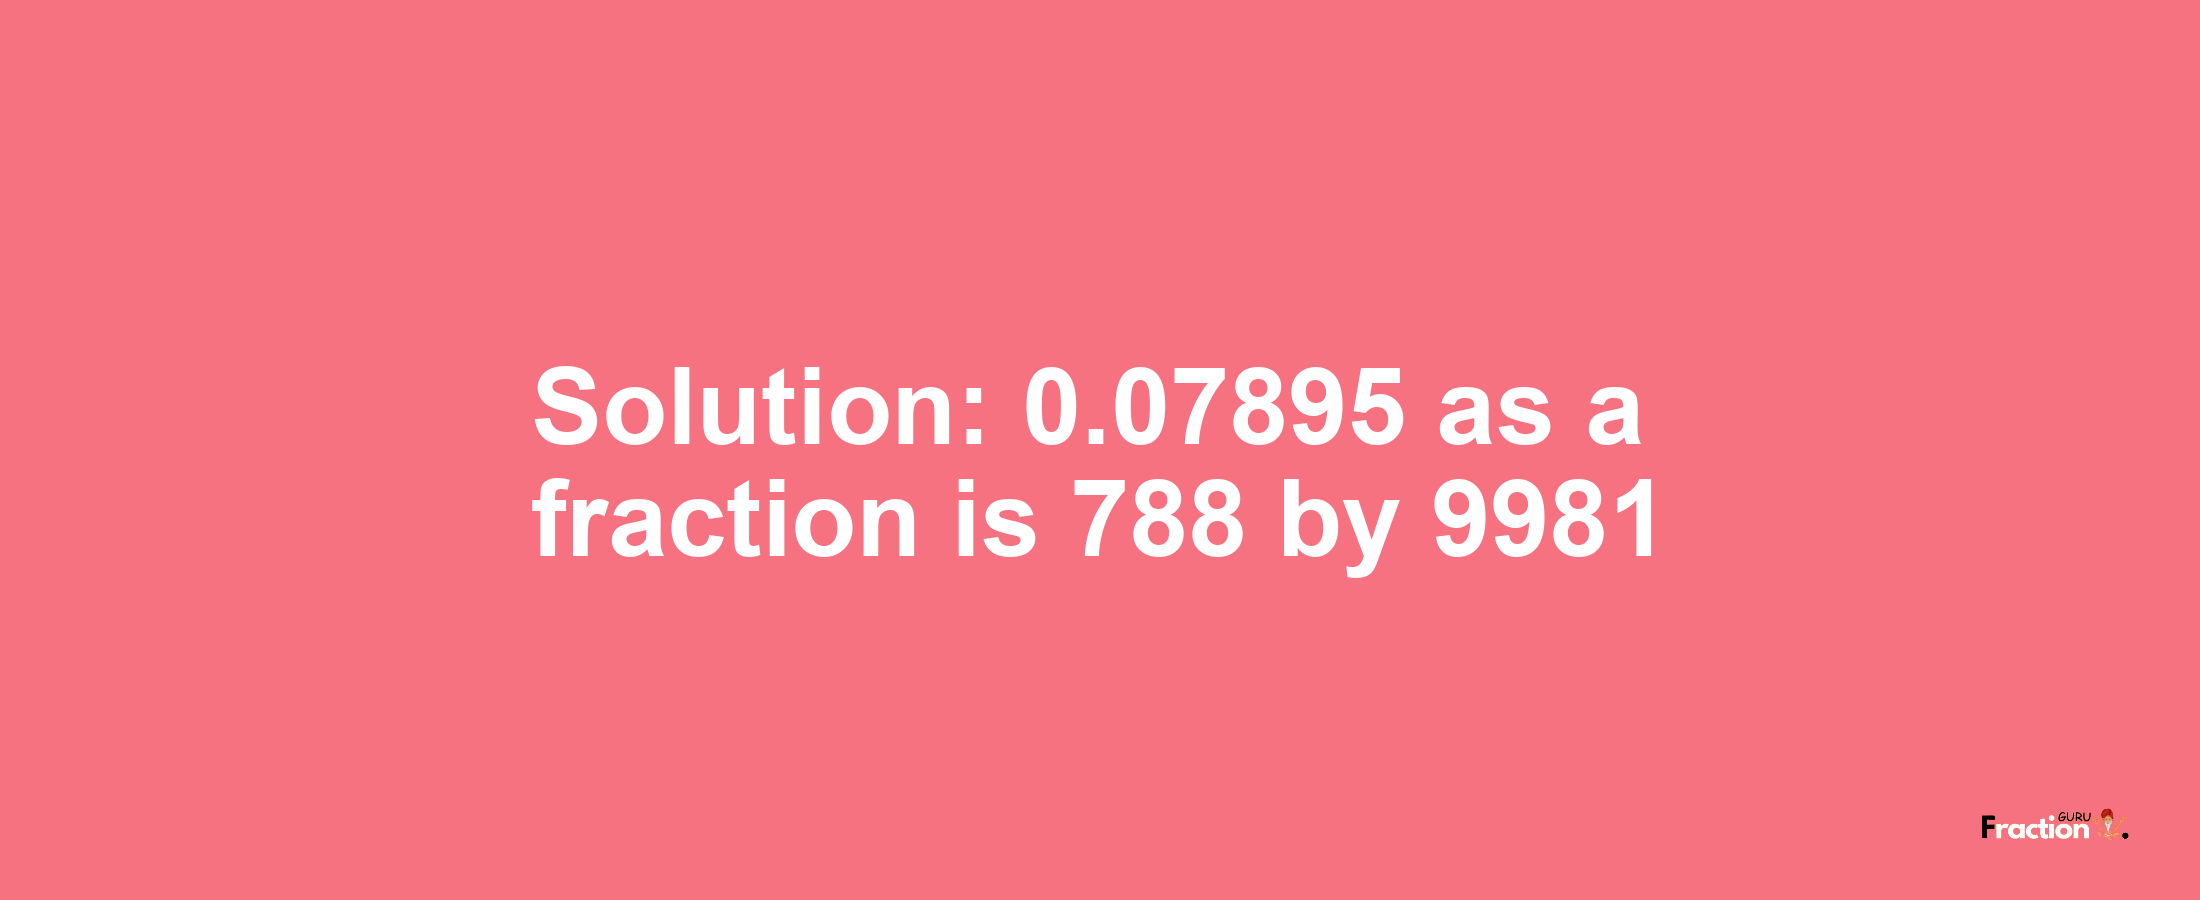 Solution:0.07895 as a fraction is 788/9981